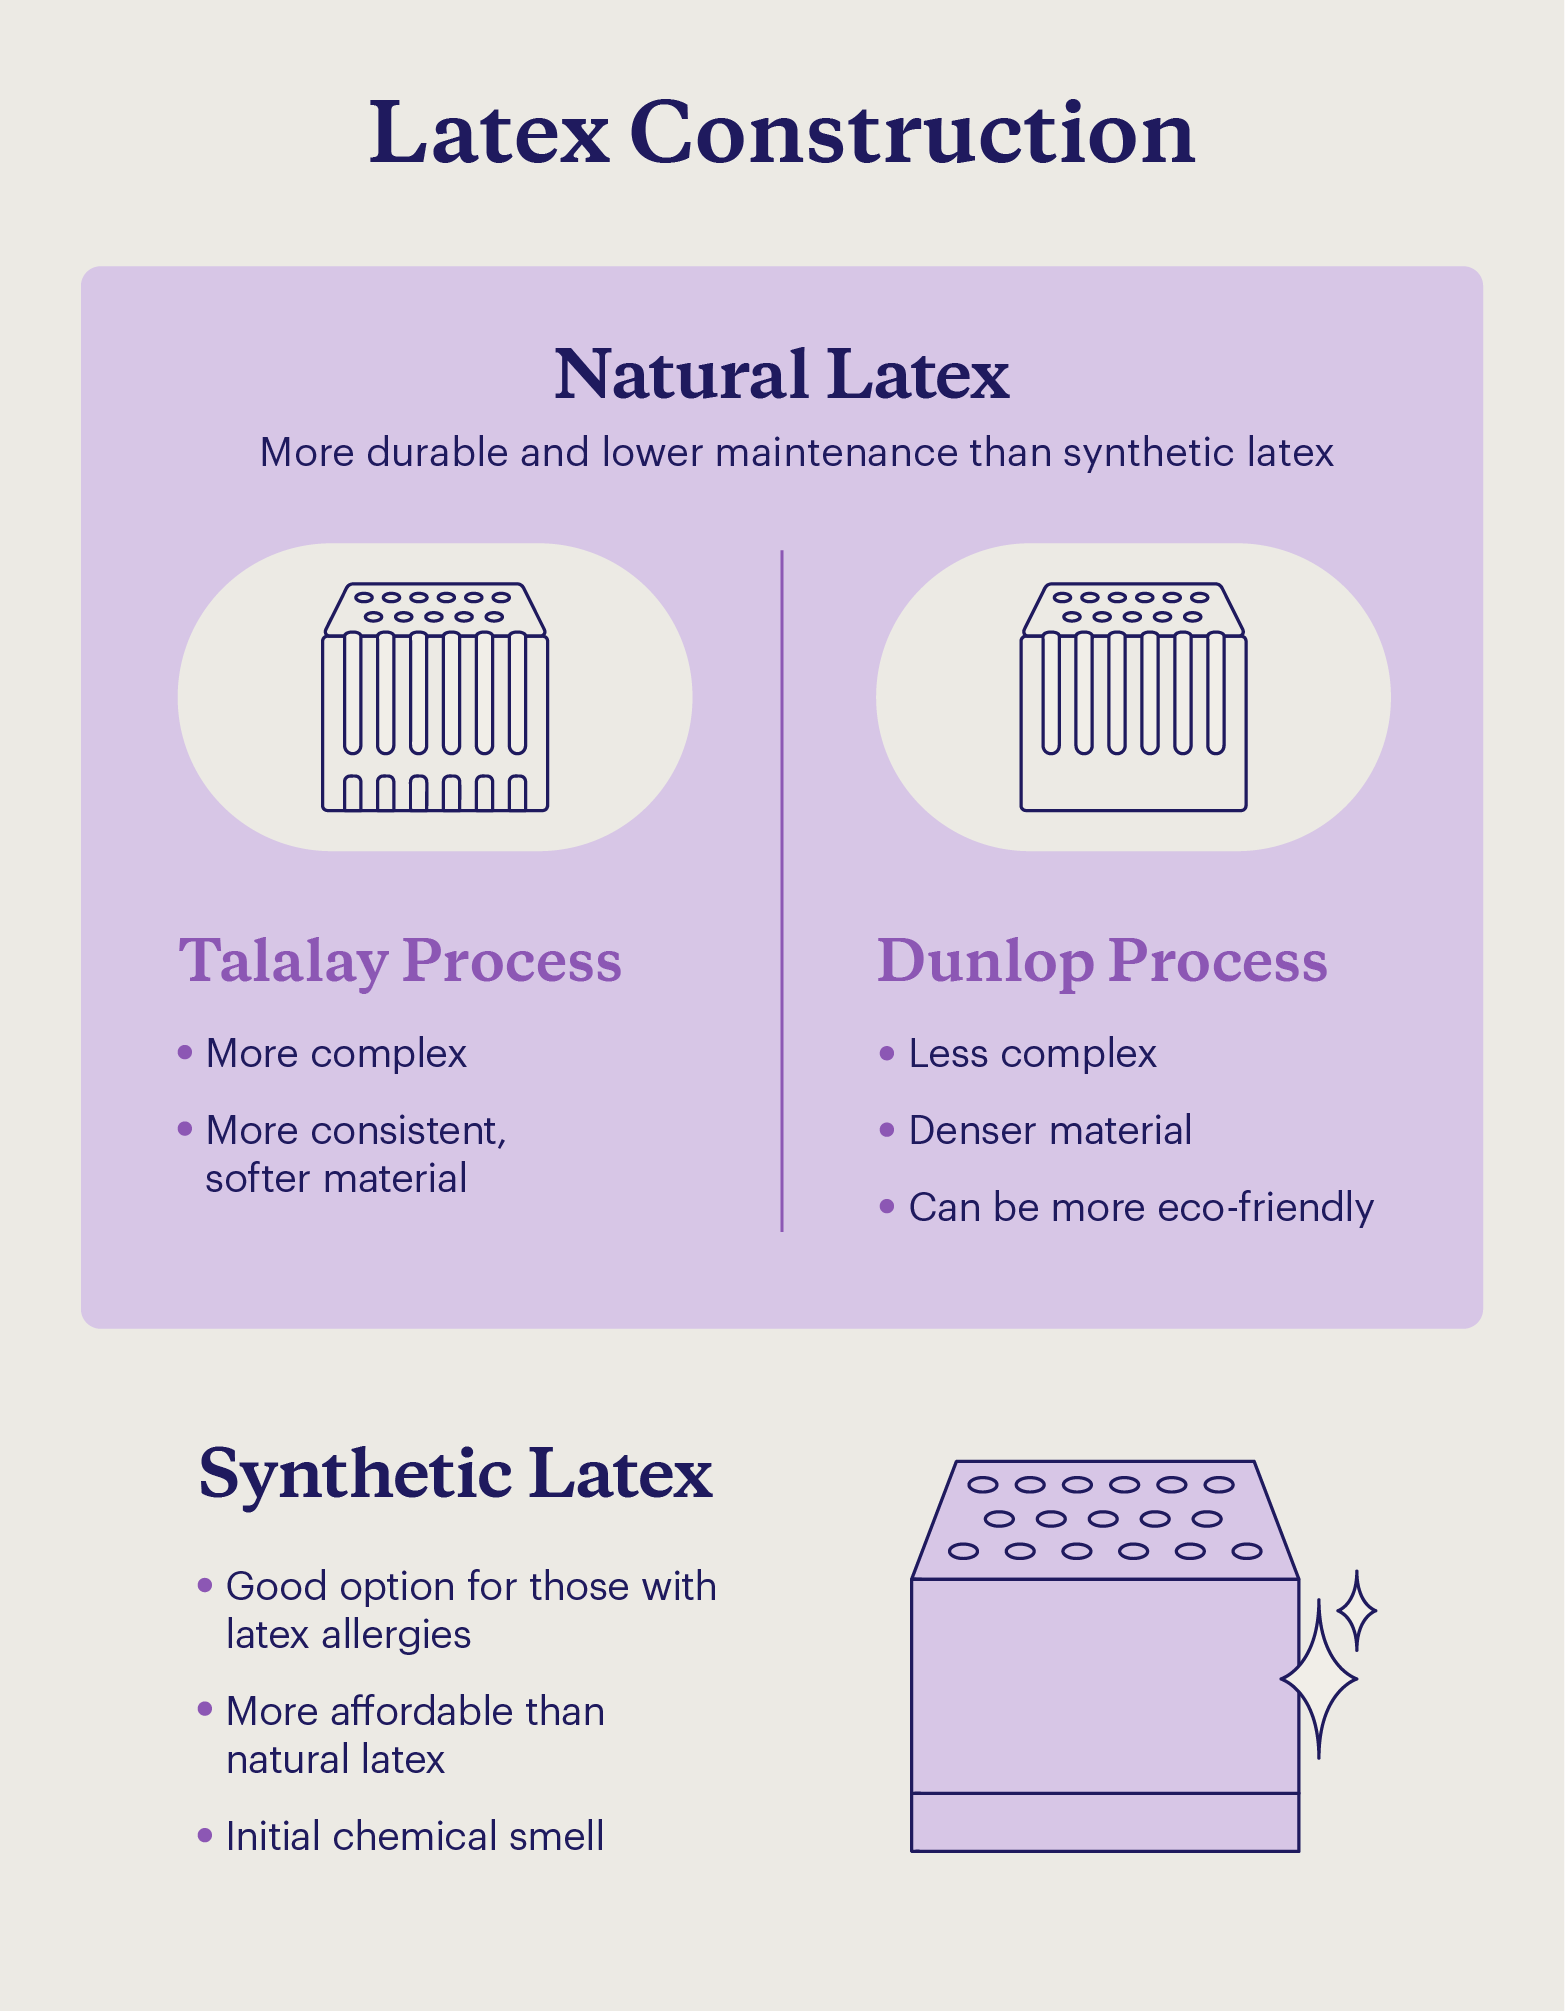 Graphic illustrating the differences in construction between types of latex.